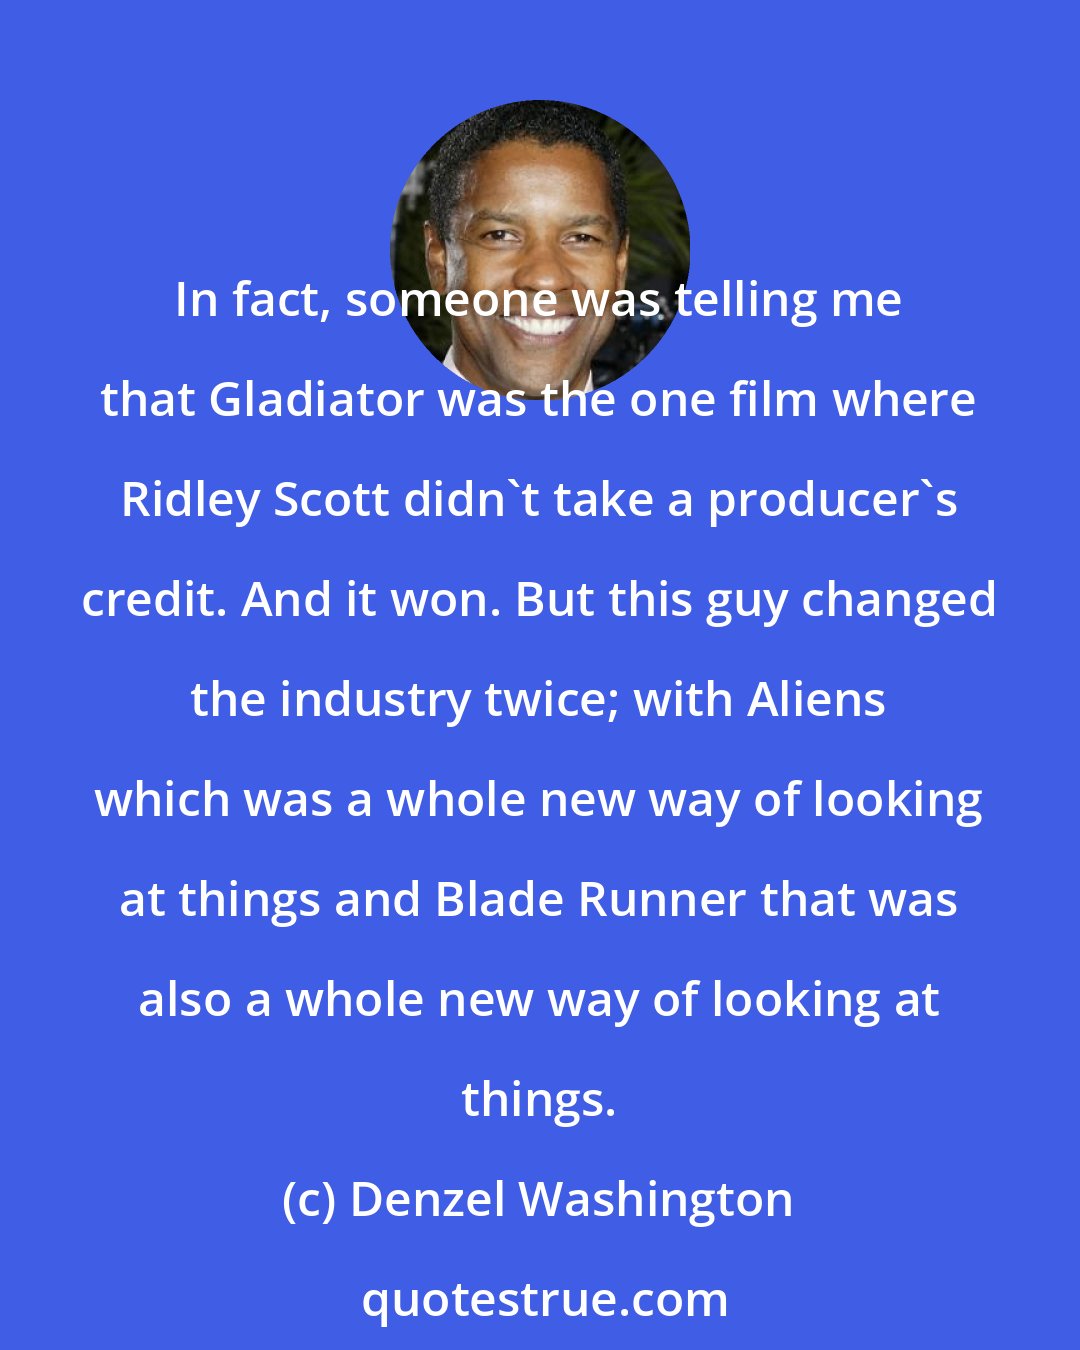 Denzel Washington: In fact, someone was telling me that Gladiator was the one film where Ridley Scott didn't take a producer's credit. And it won. But this guy changed the industry twice; with Aliens which was a whole new way of looking at things and Blade Runner that was also a whole new way of looking at things.